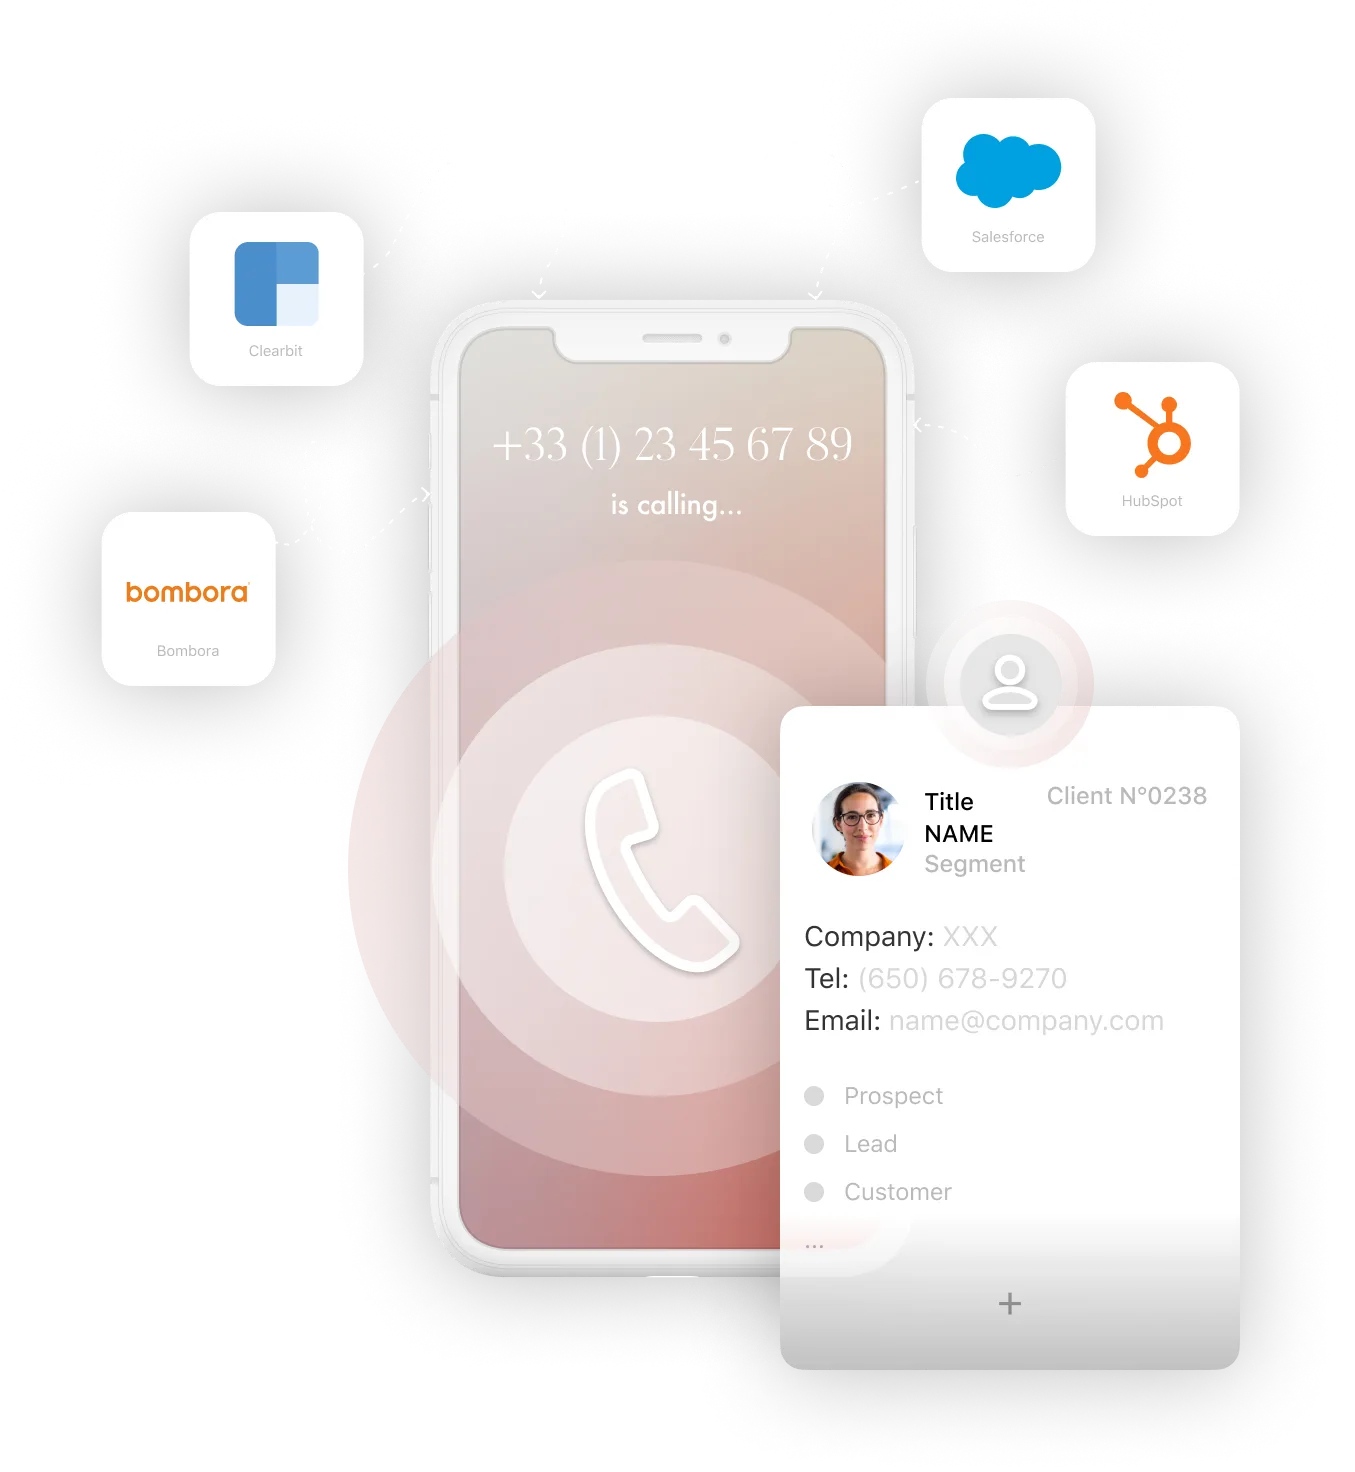 Callr Actions can connect to Bombora, Clearbit, Salesforce, HubSpot, and many more